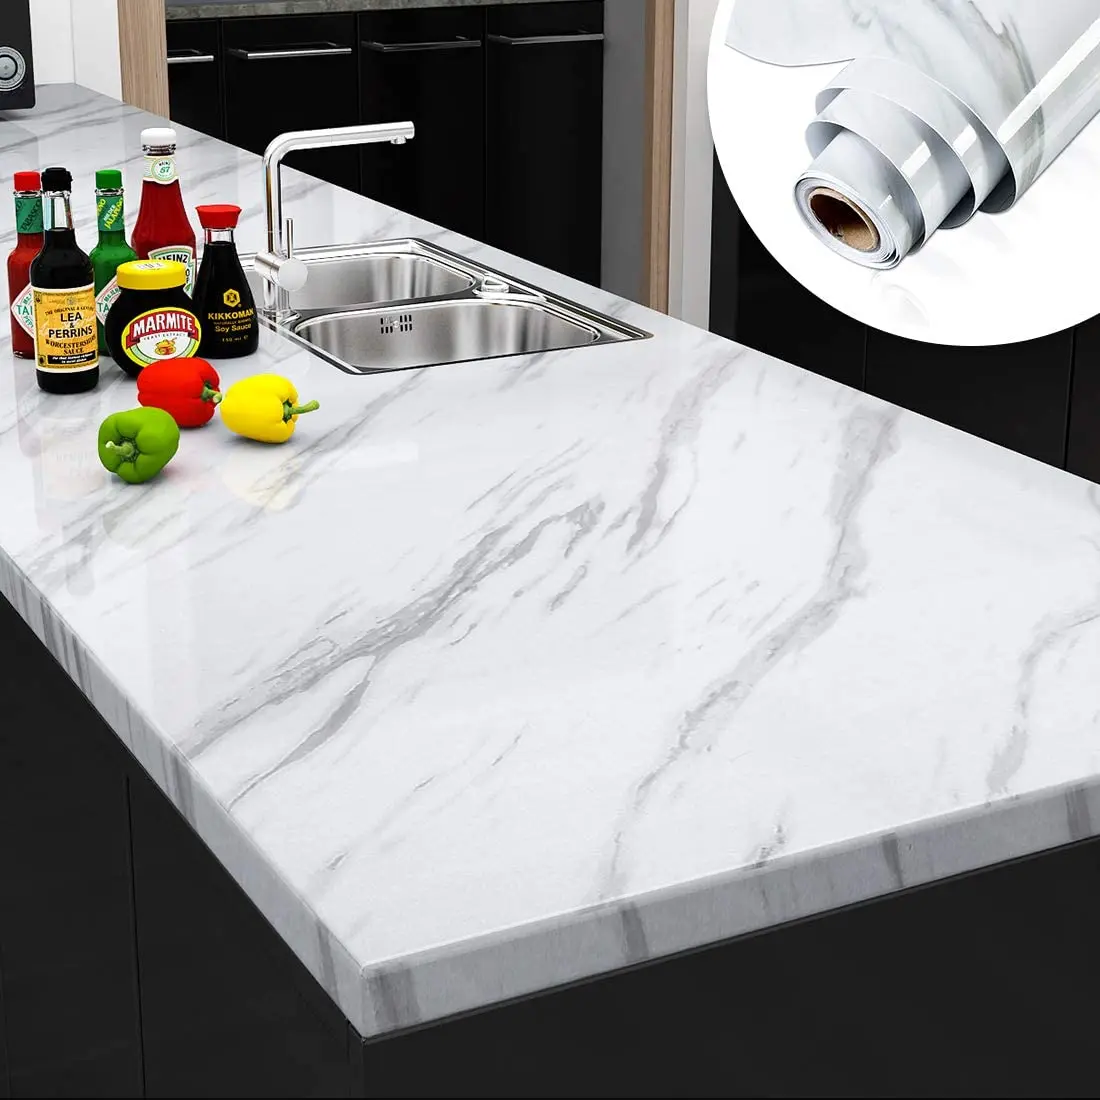 

60cmx5M Home PVC Self-Adhesive Marble Wall Sticker Waterproof and Oilproof Kitchen Bedroom Bathroom Table Countertop Wallpapers